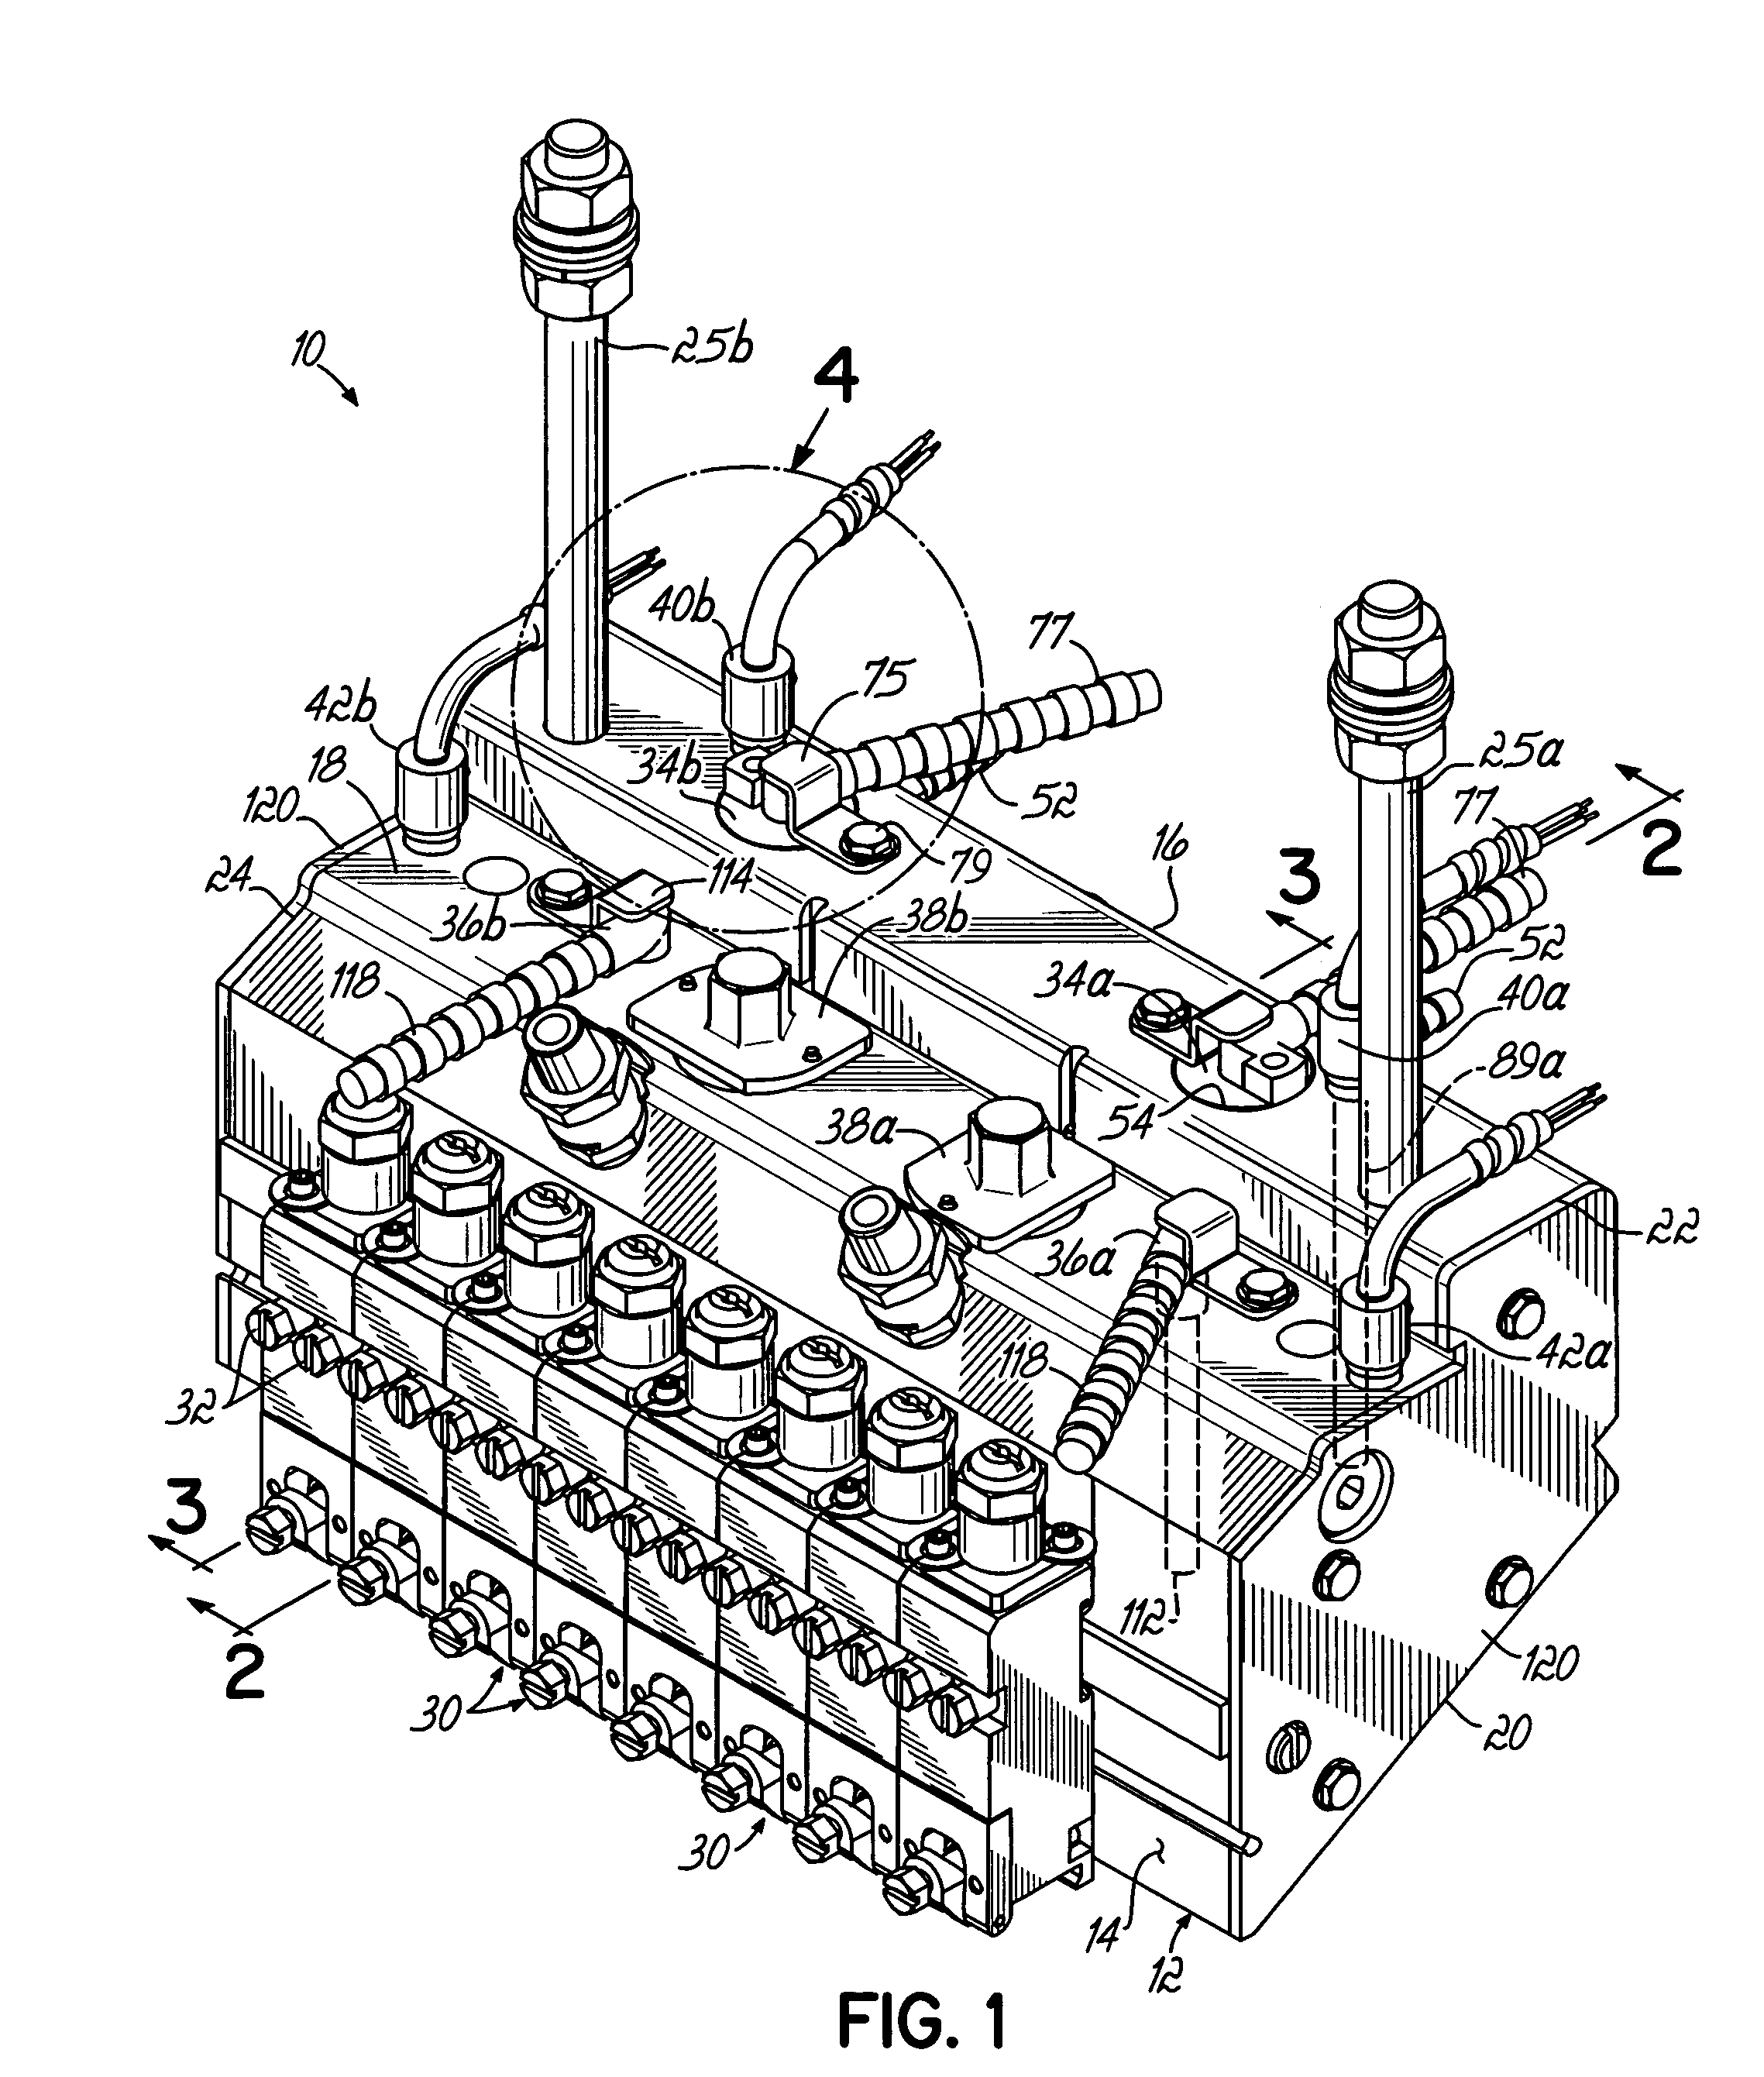 Integral manifold for liquid material dispensing systems